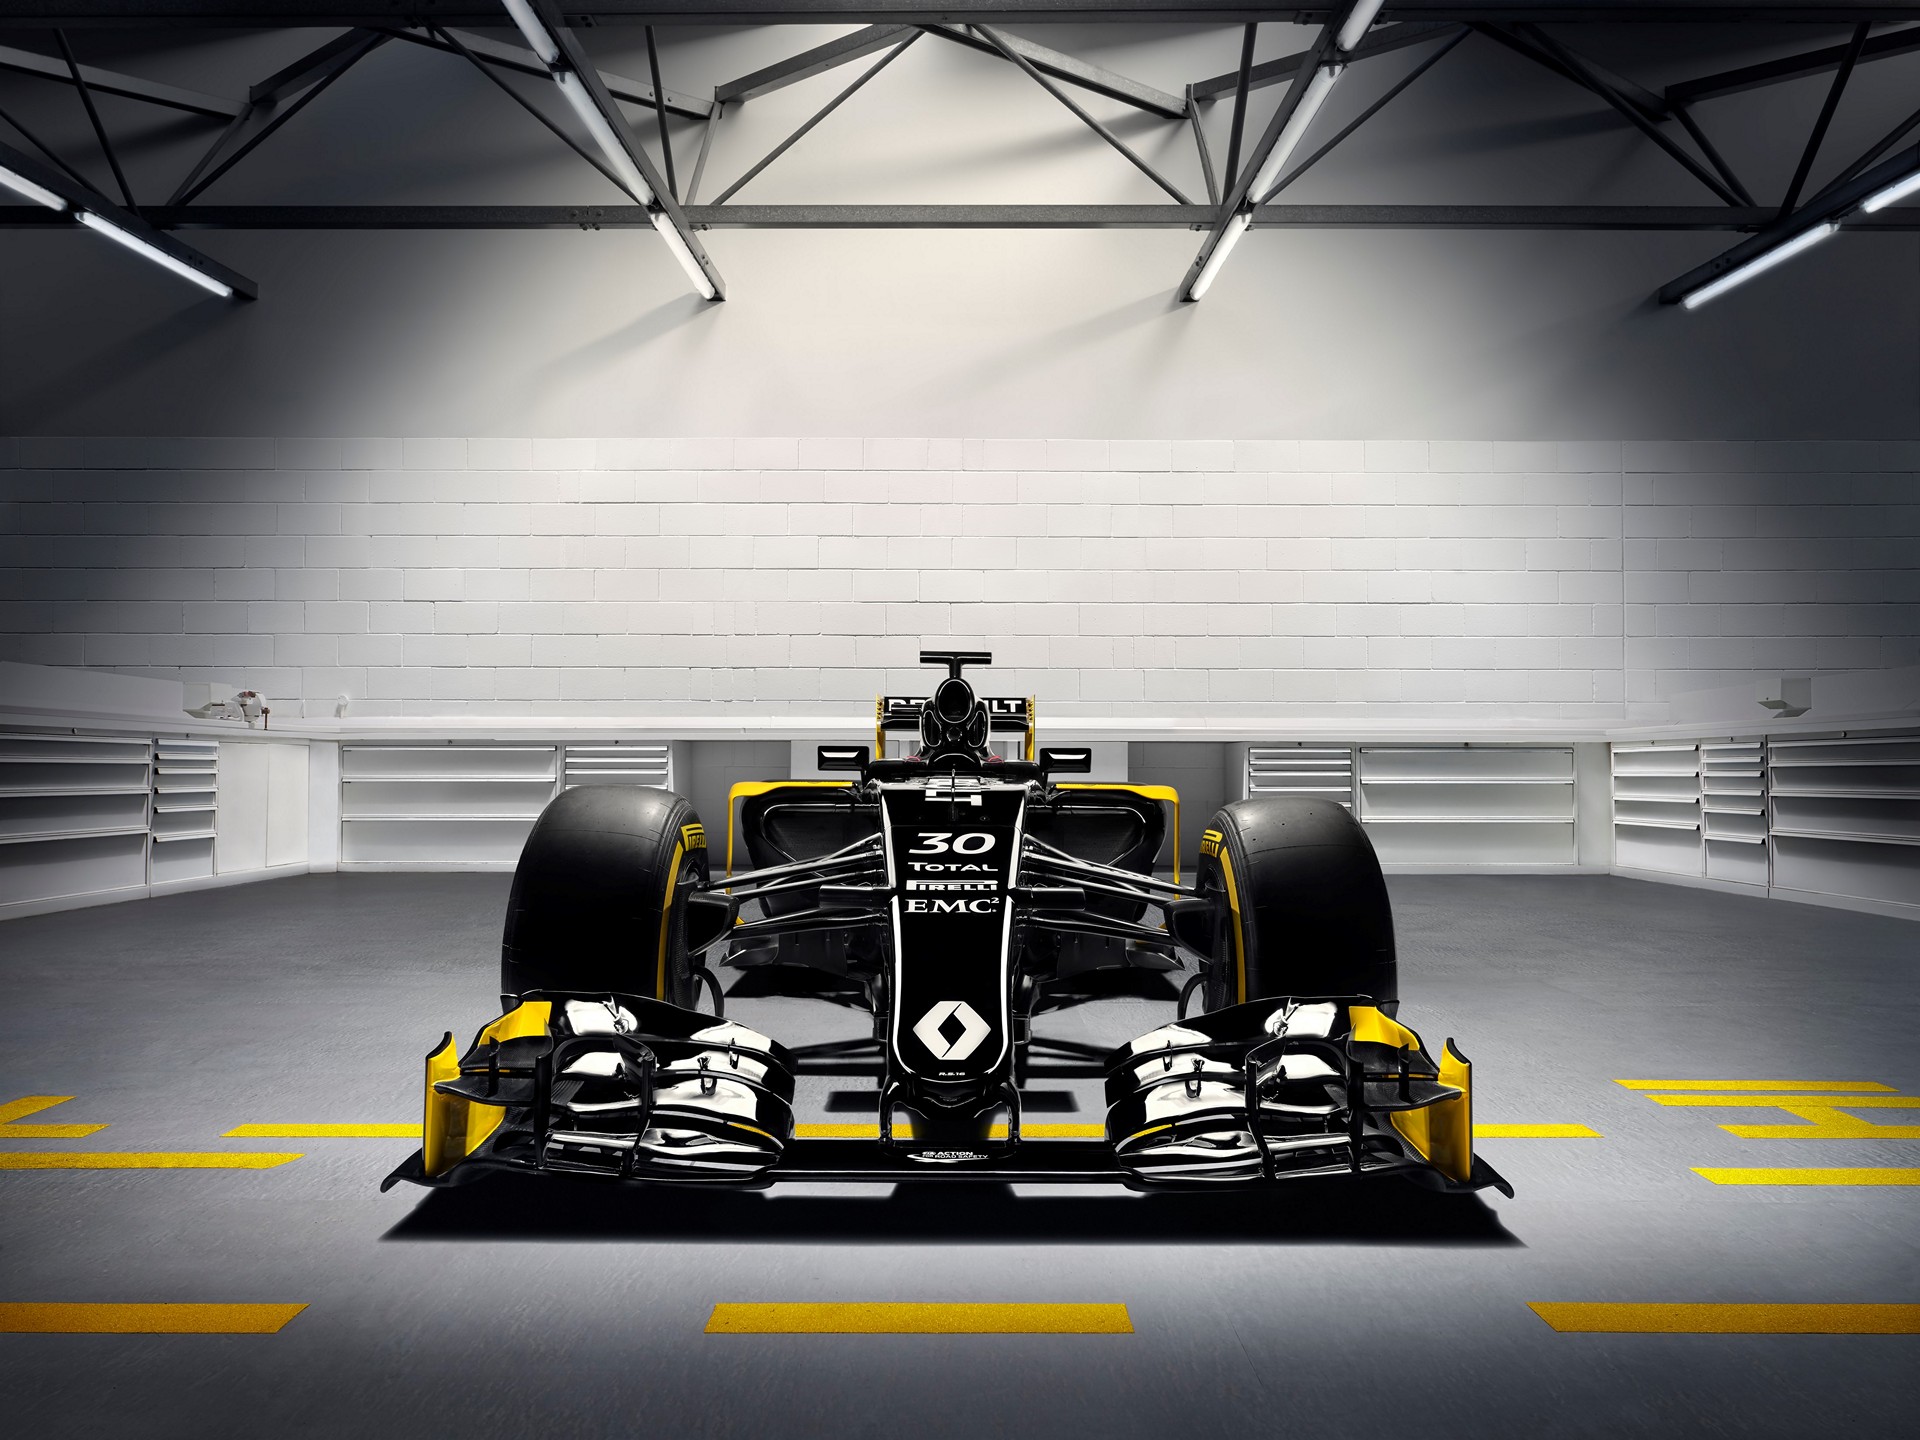 Infiniti’s successful involvement in Formula One enters the next phase. Starting with the new 2016 season, Infiniti will be a technical partner of the new Renault Sport Formula One team © Nissan Motor Co., Ltd.